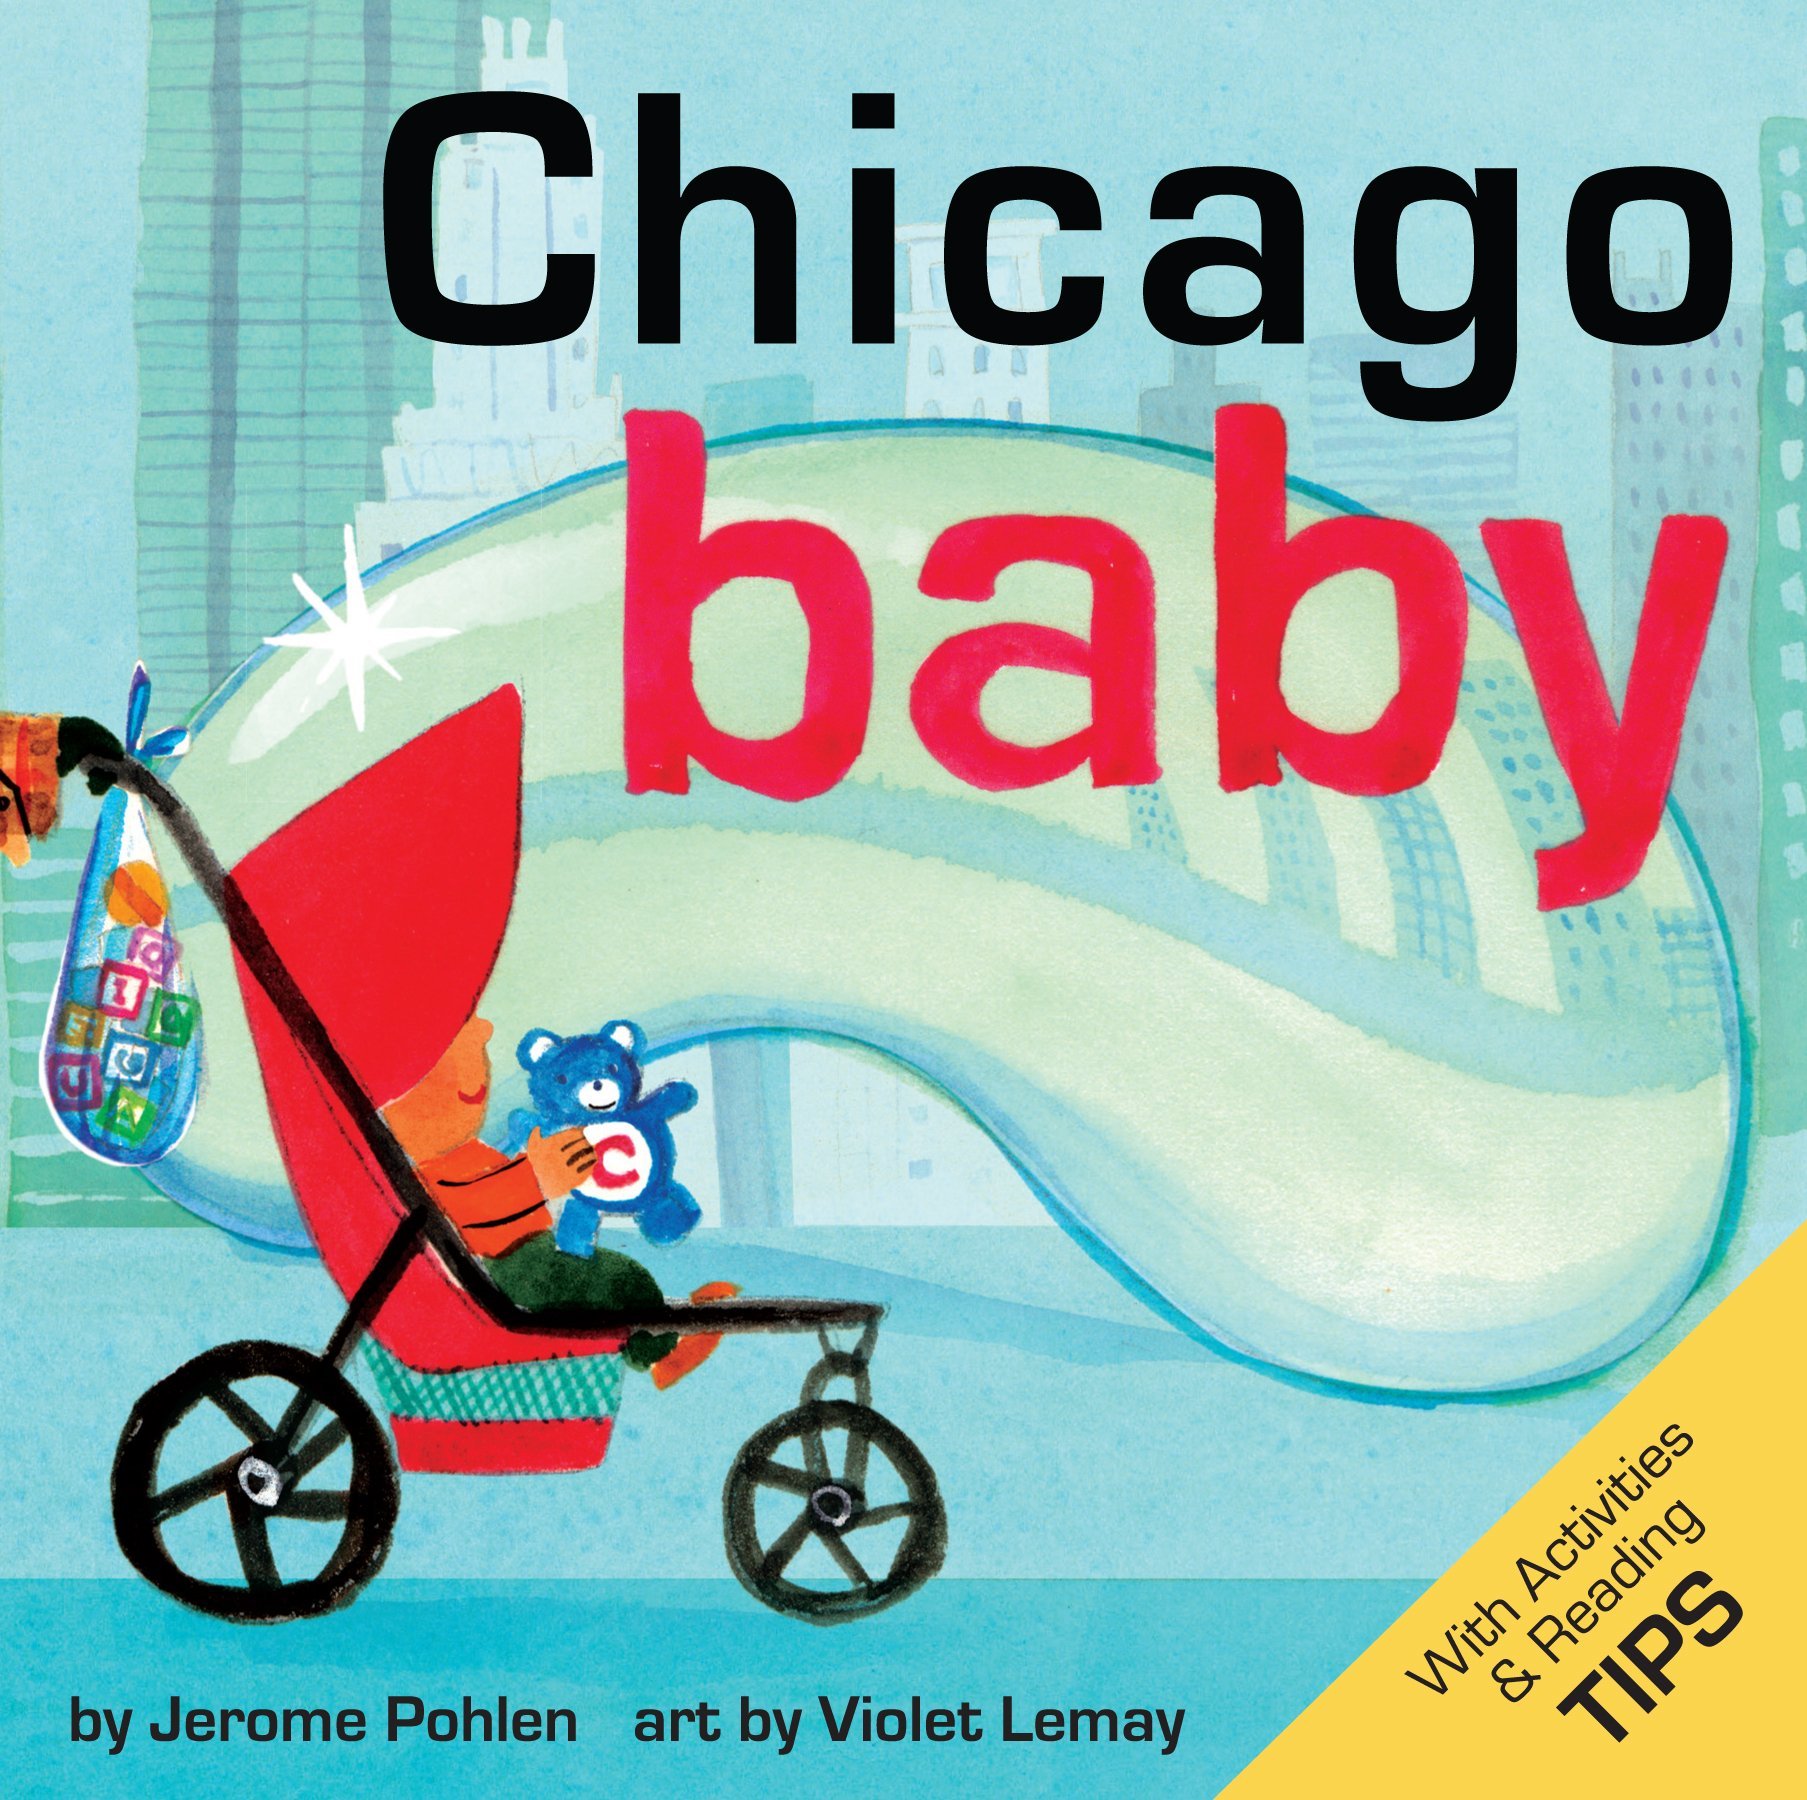 Baby Books for the Chicago History Museum